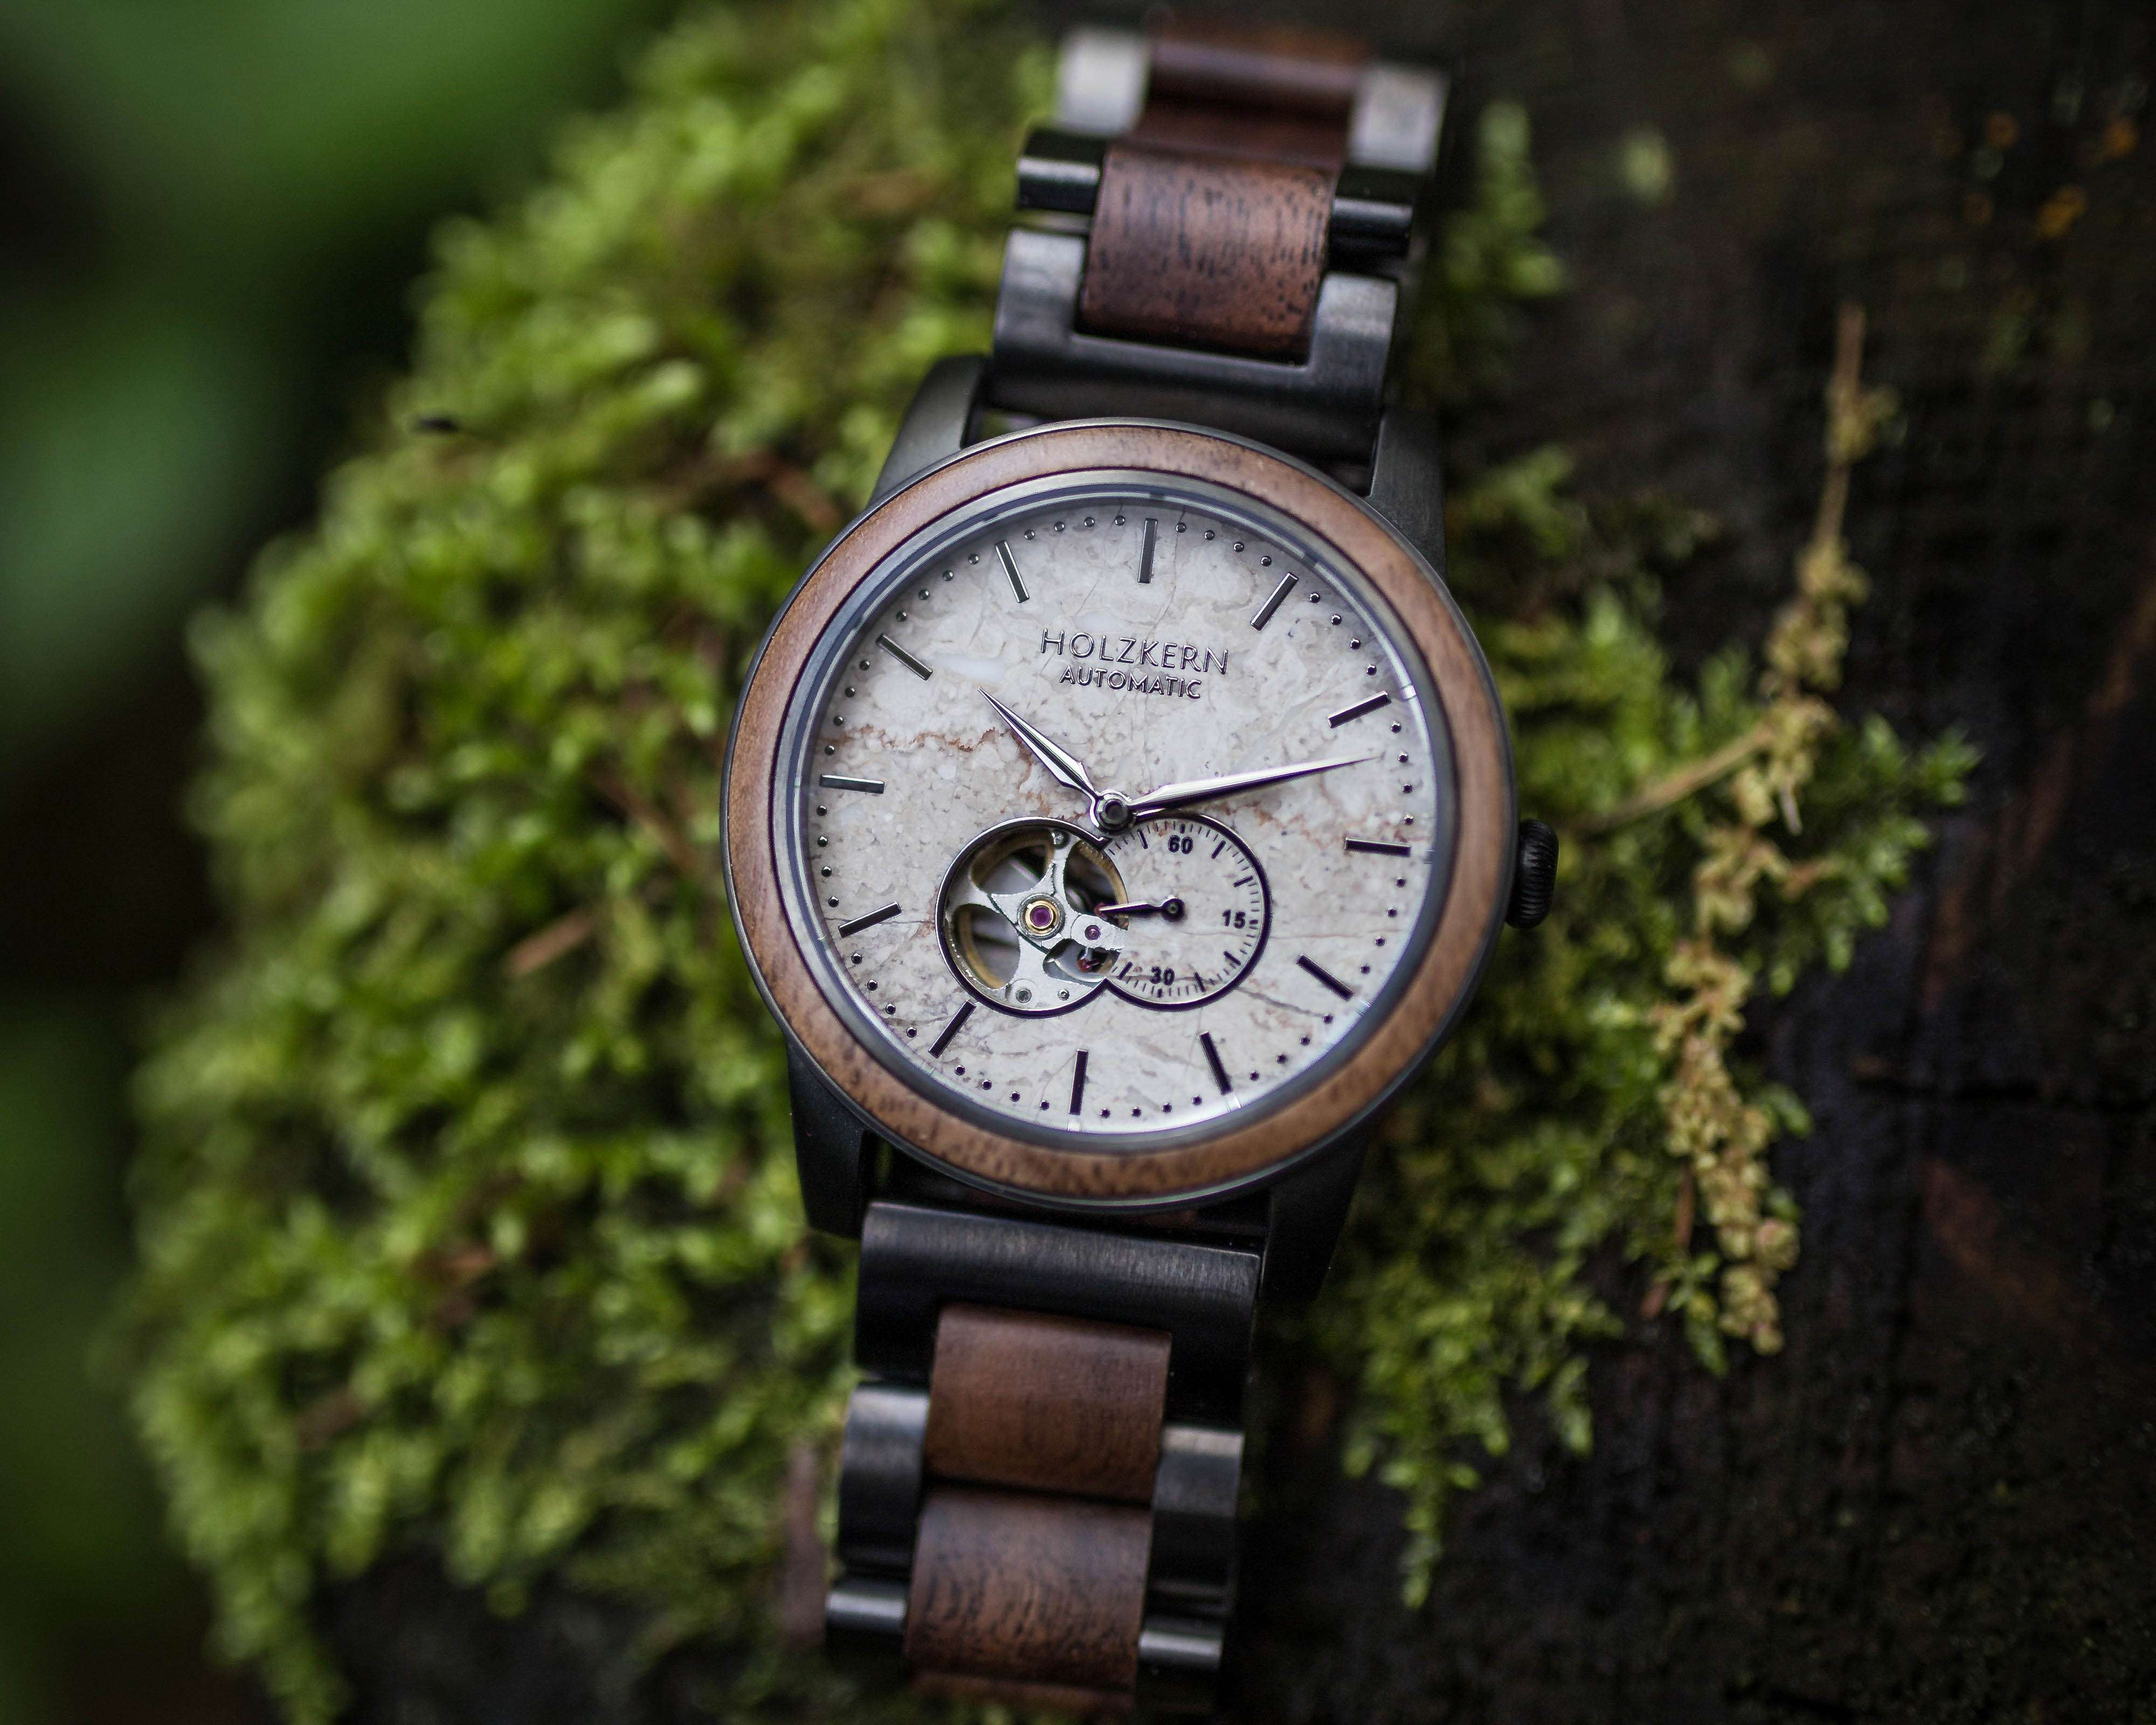 Taboola Ad Example 62214 - Handcrafted Out Of Wood And Stone. Why These Timepieces Are Special For Nature Lovers.